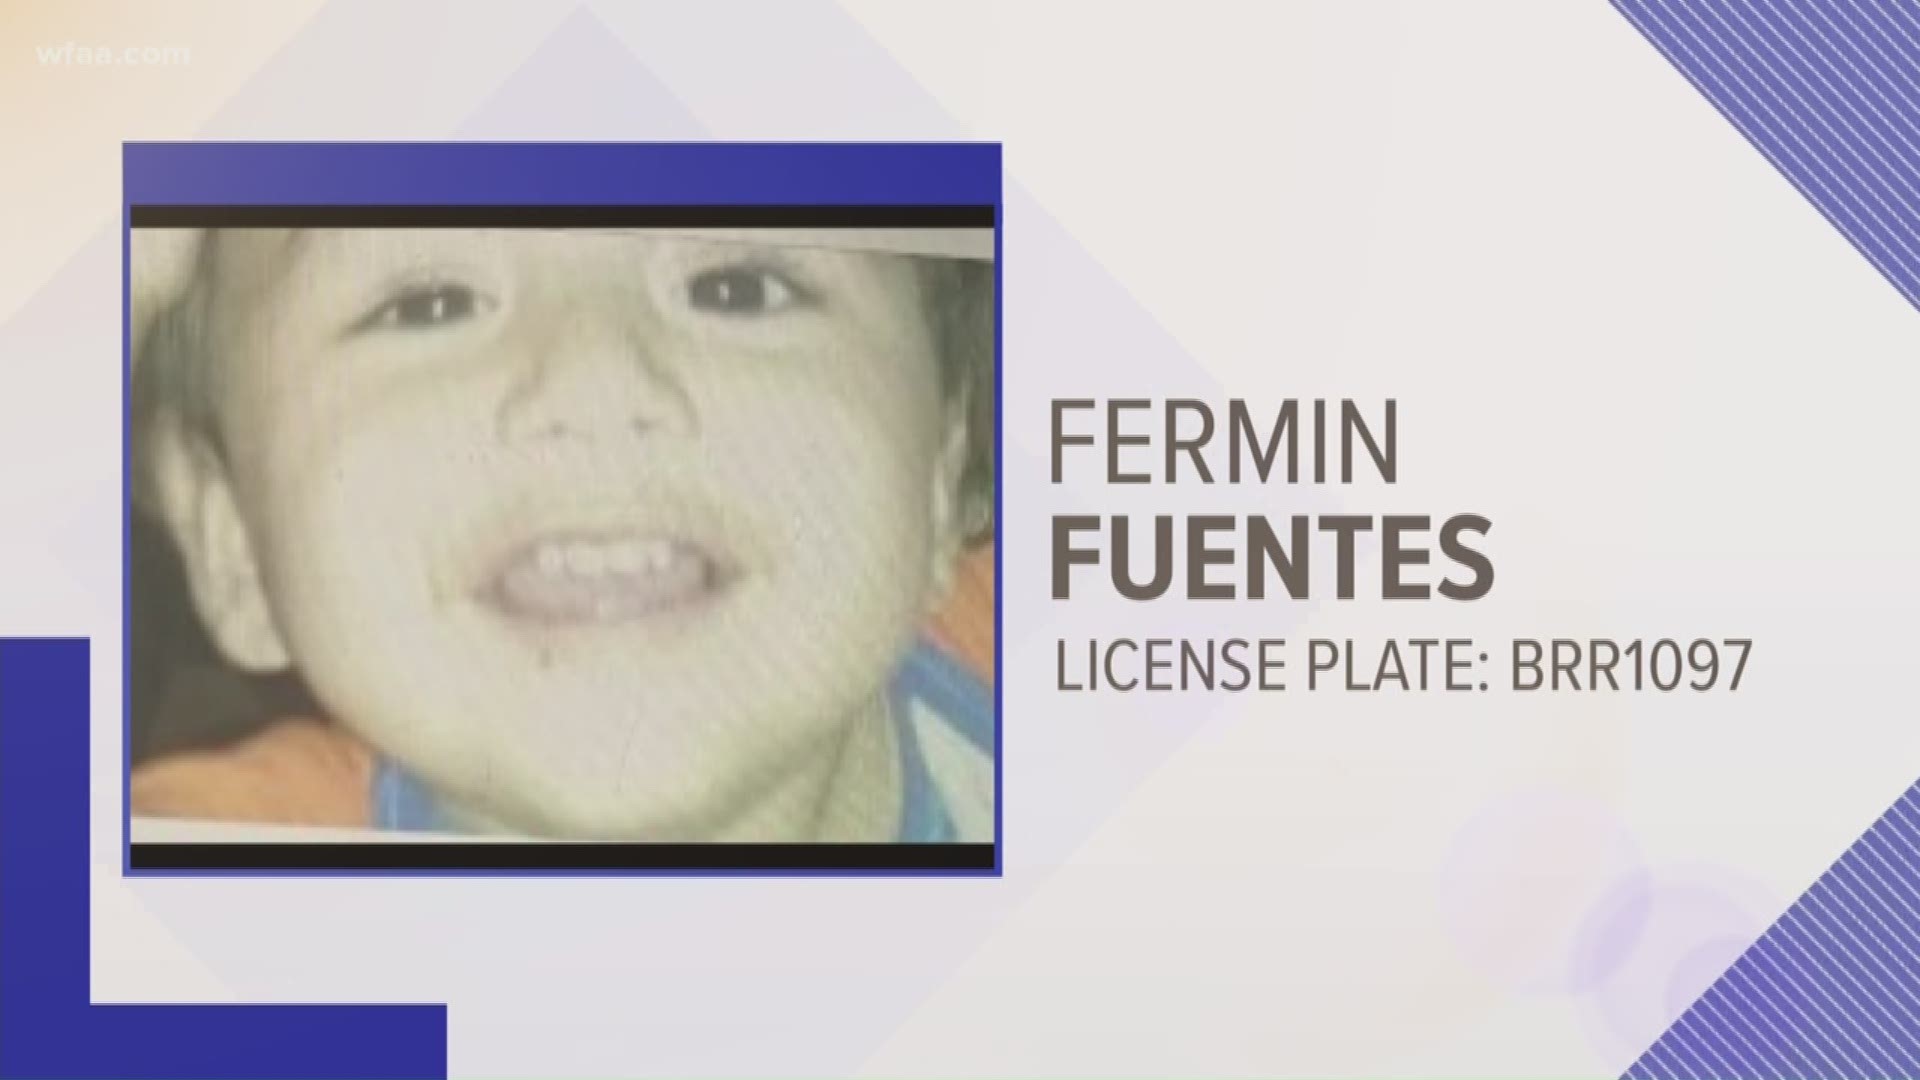 Fermin Fuentes is only 4 years old.